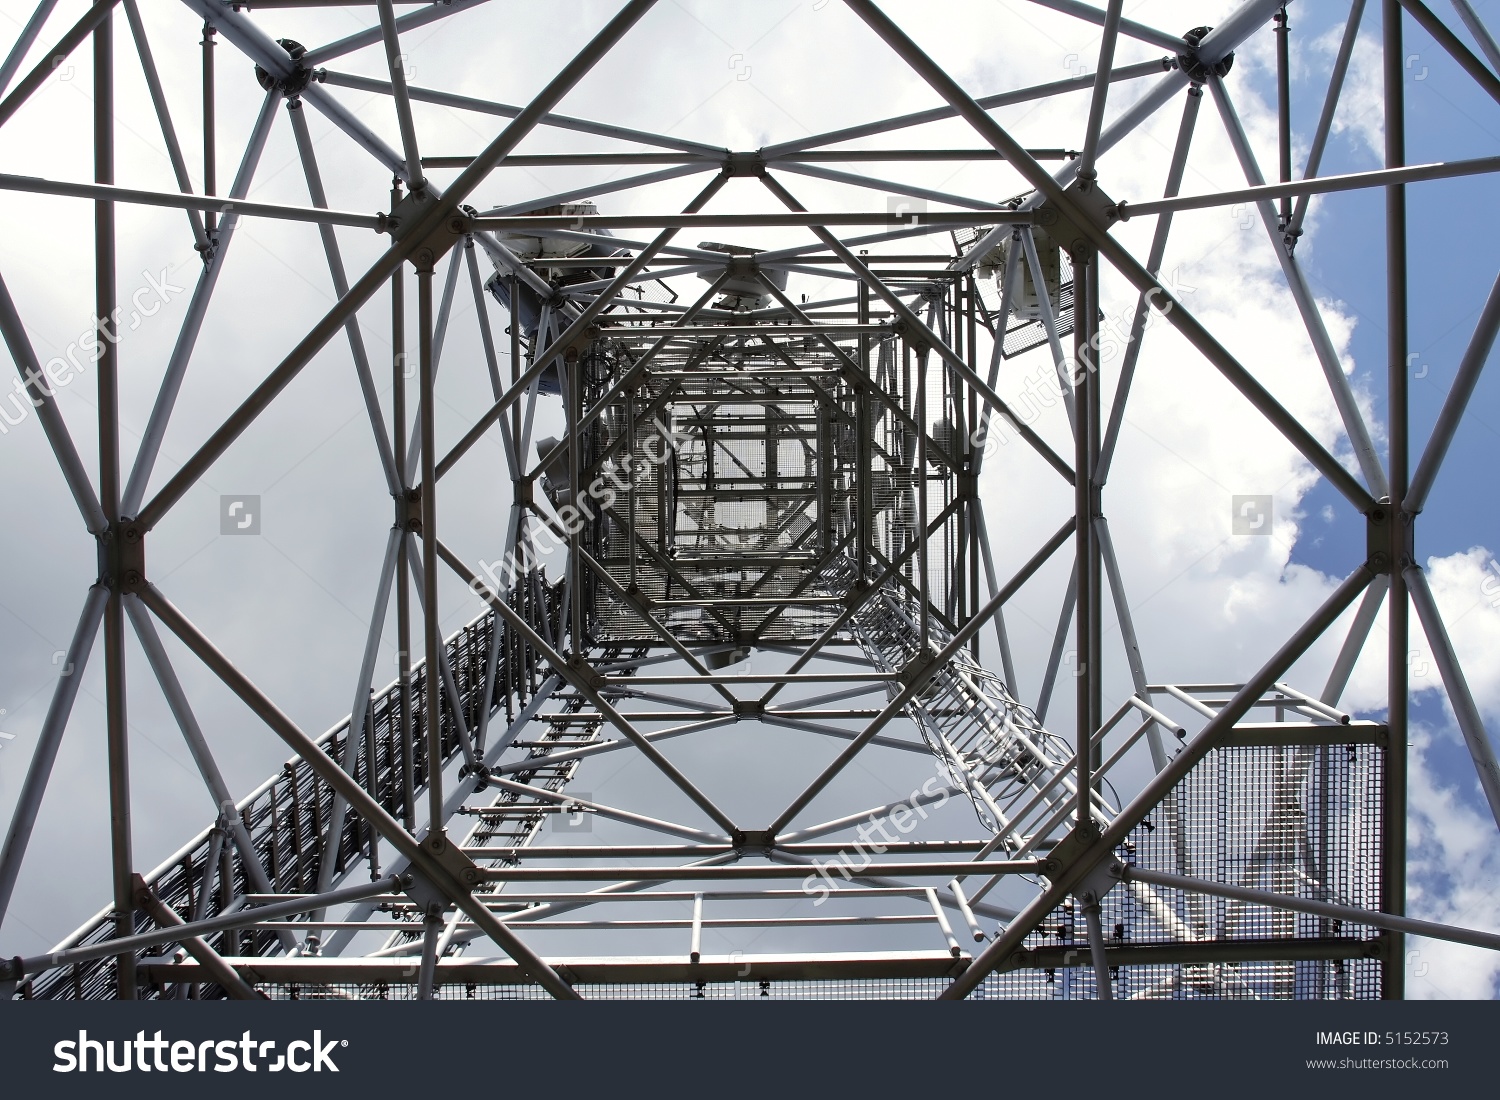 Metal Structure Of Antenna Mast Under Sky With Clouds Stock Photo.